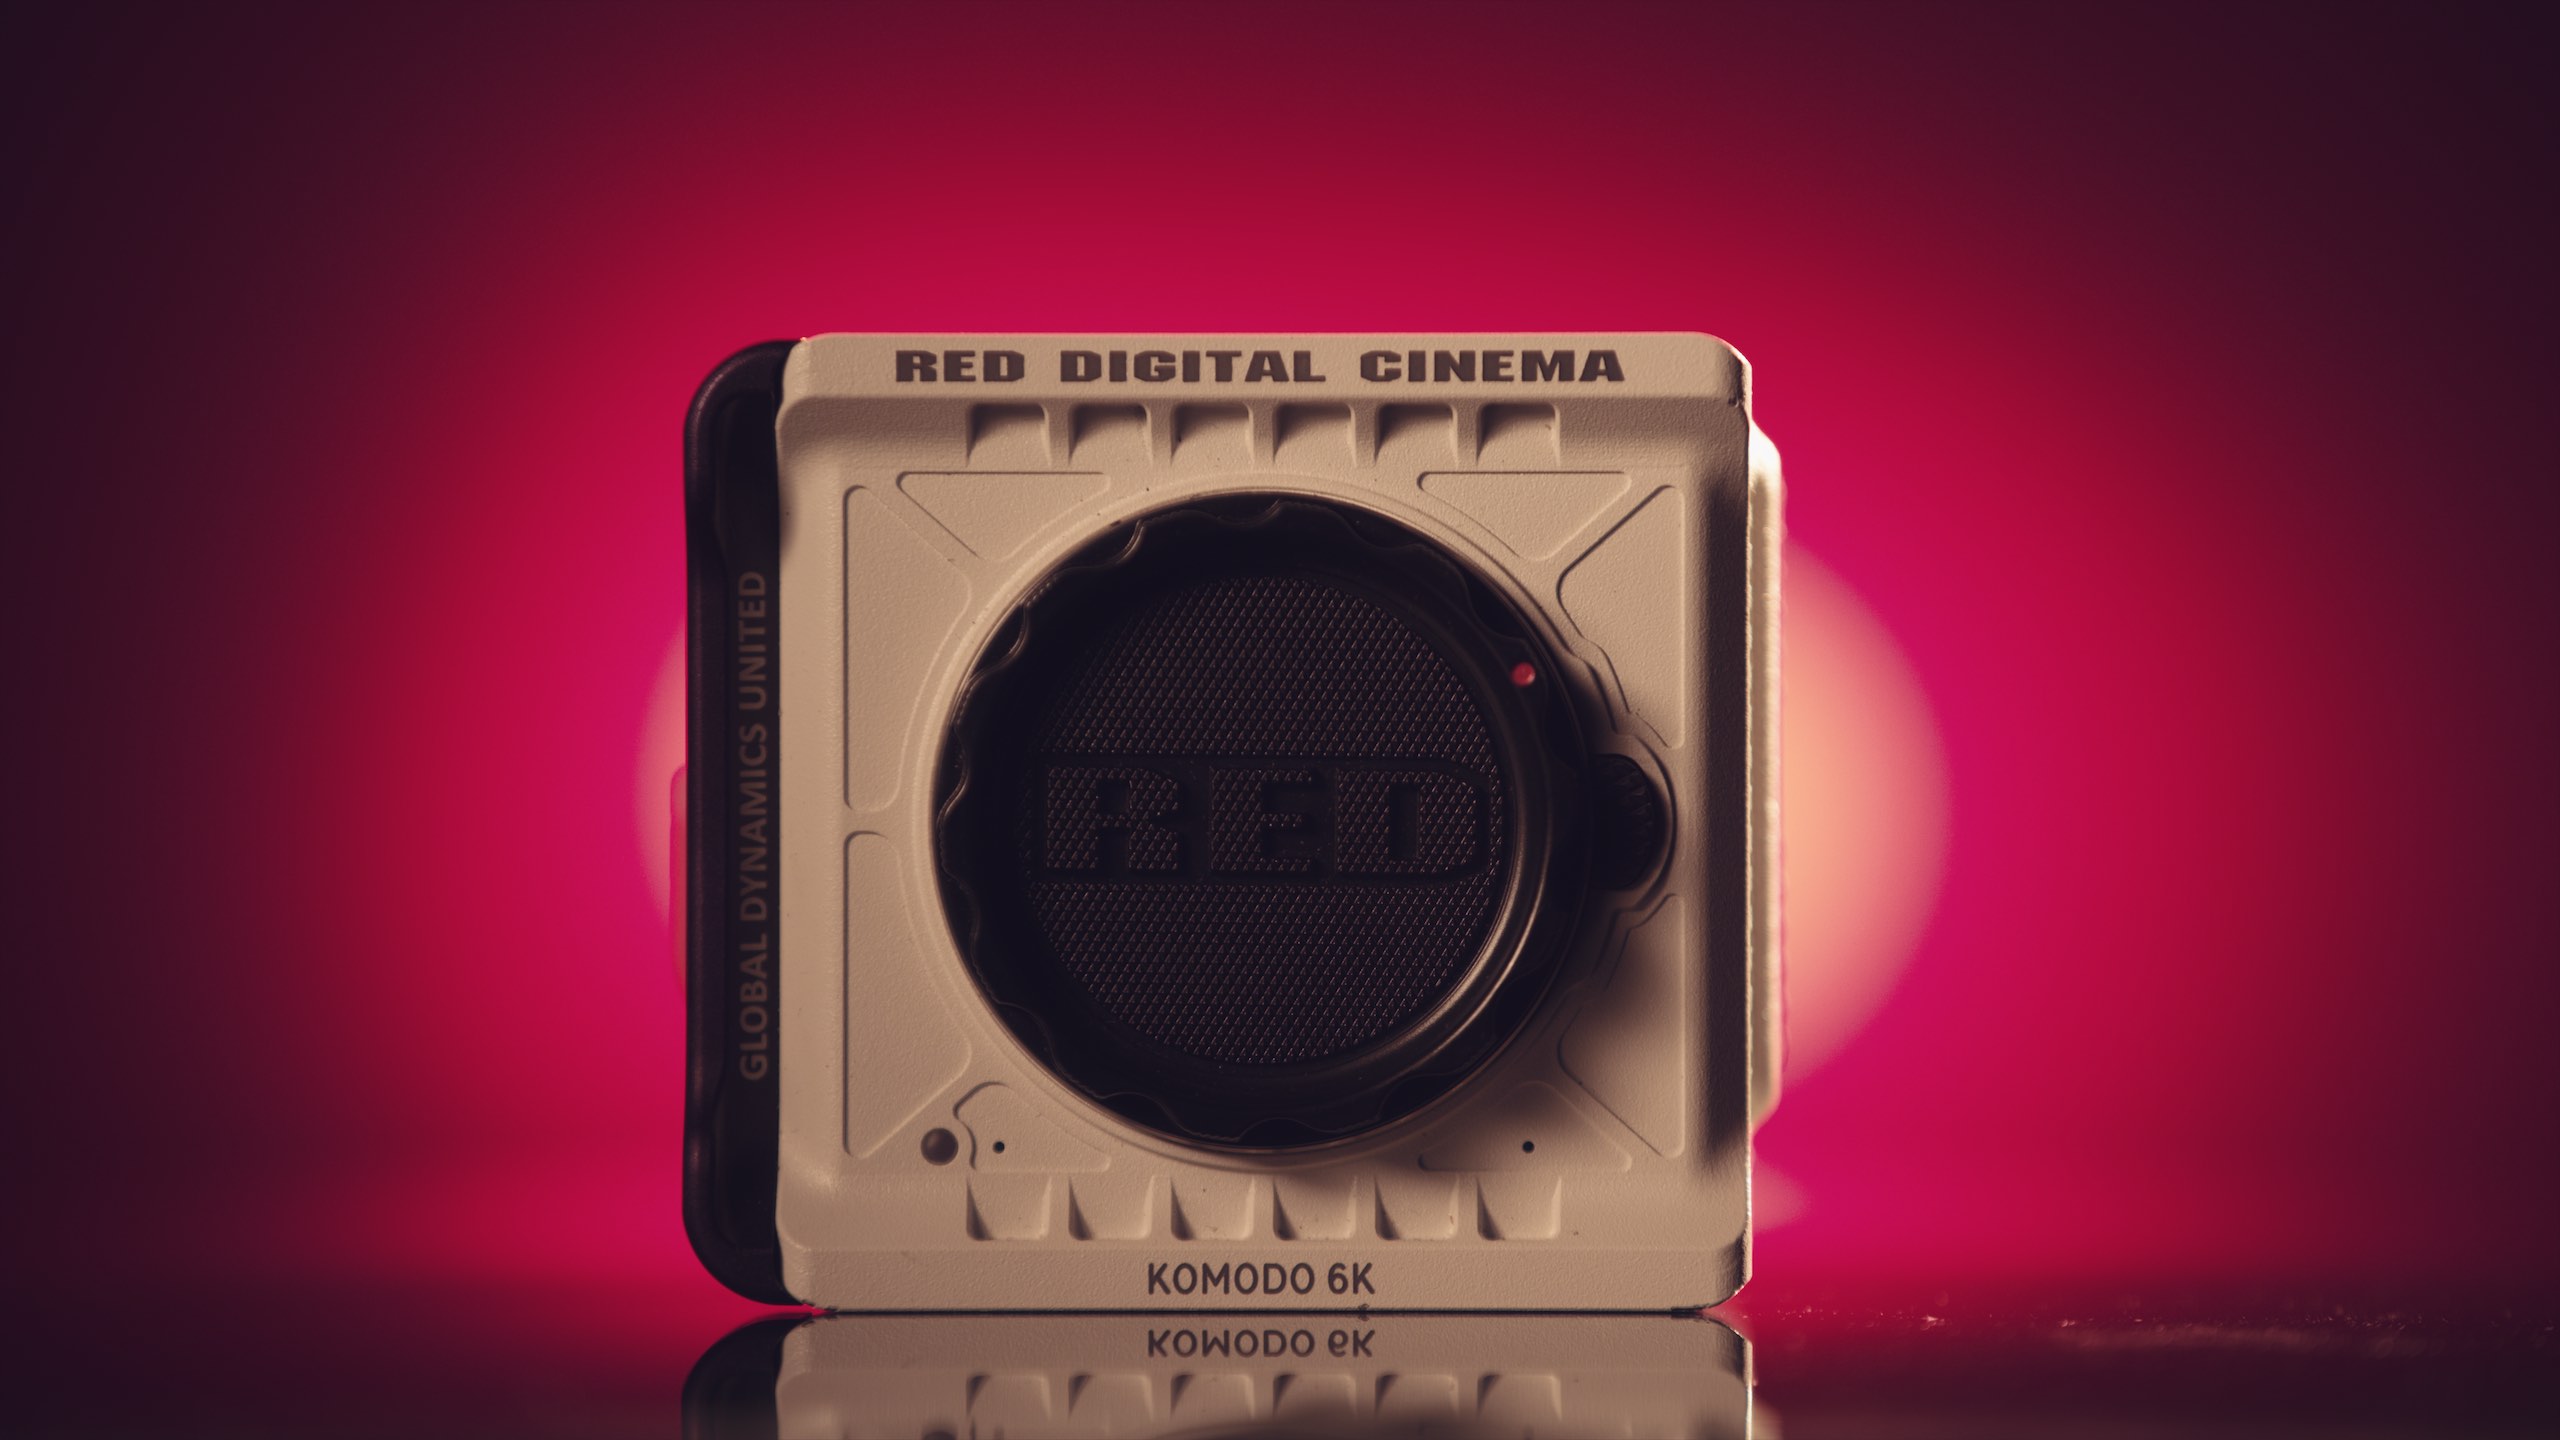 RED Komodo Distance Test White colored RED-Komodo-Compact-Cinema-Camera against a red backdrop